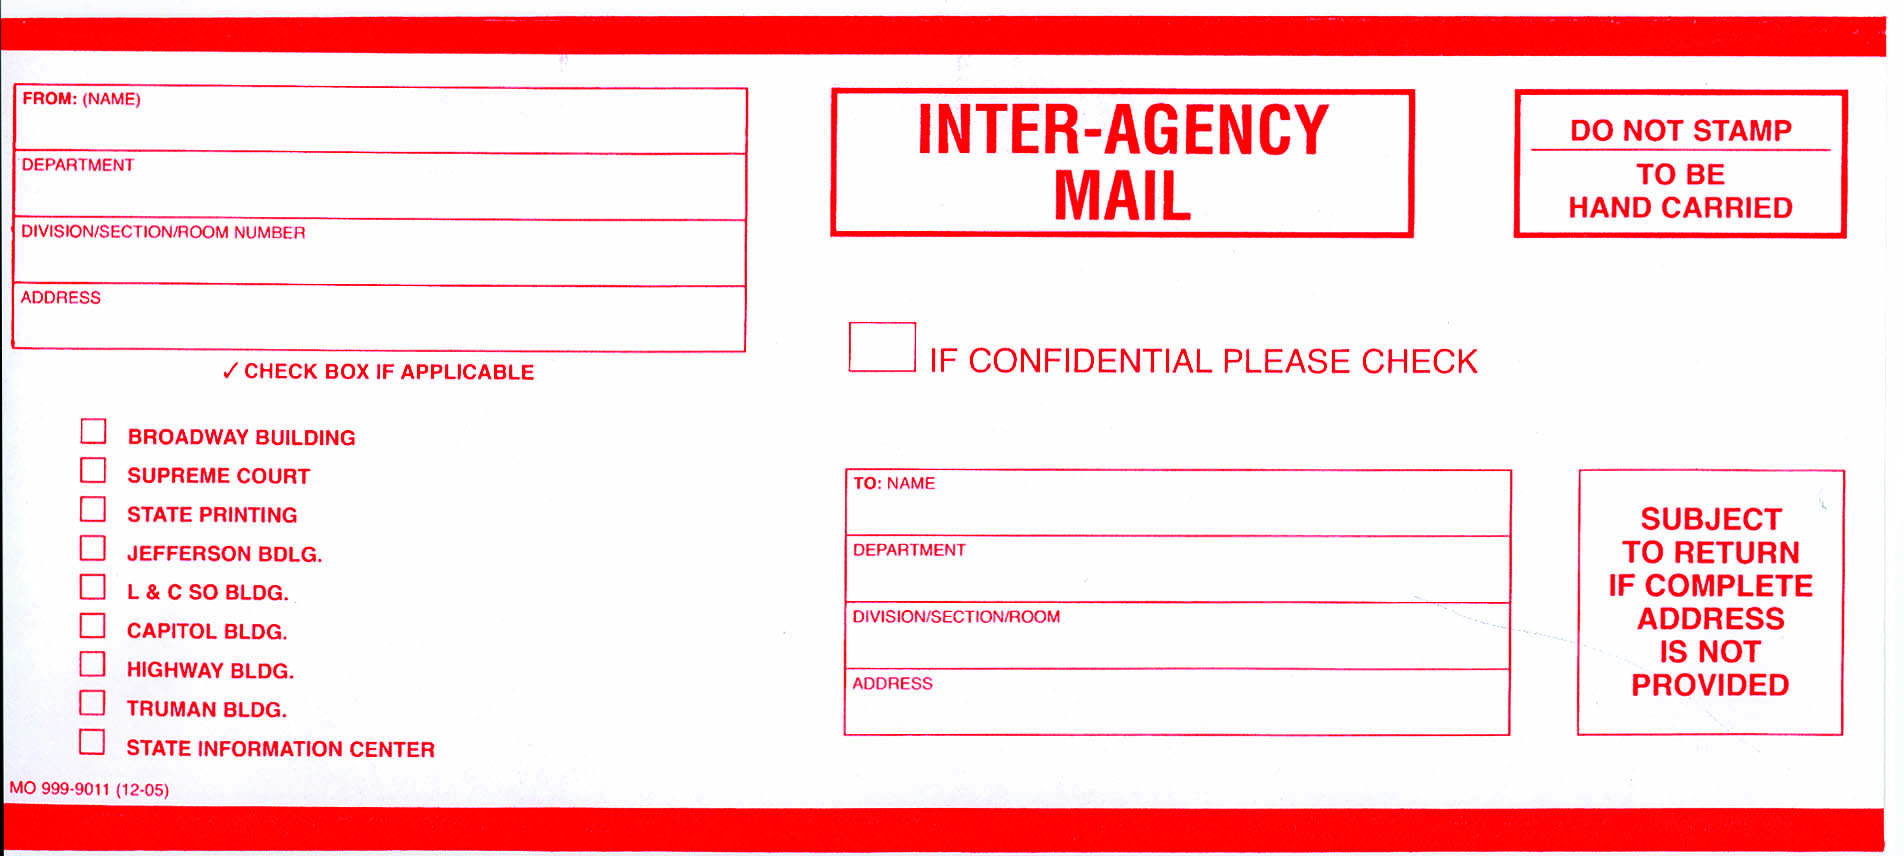 Inter-Agency Mail